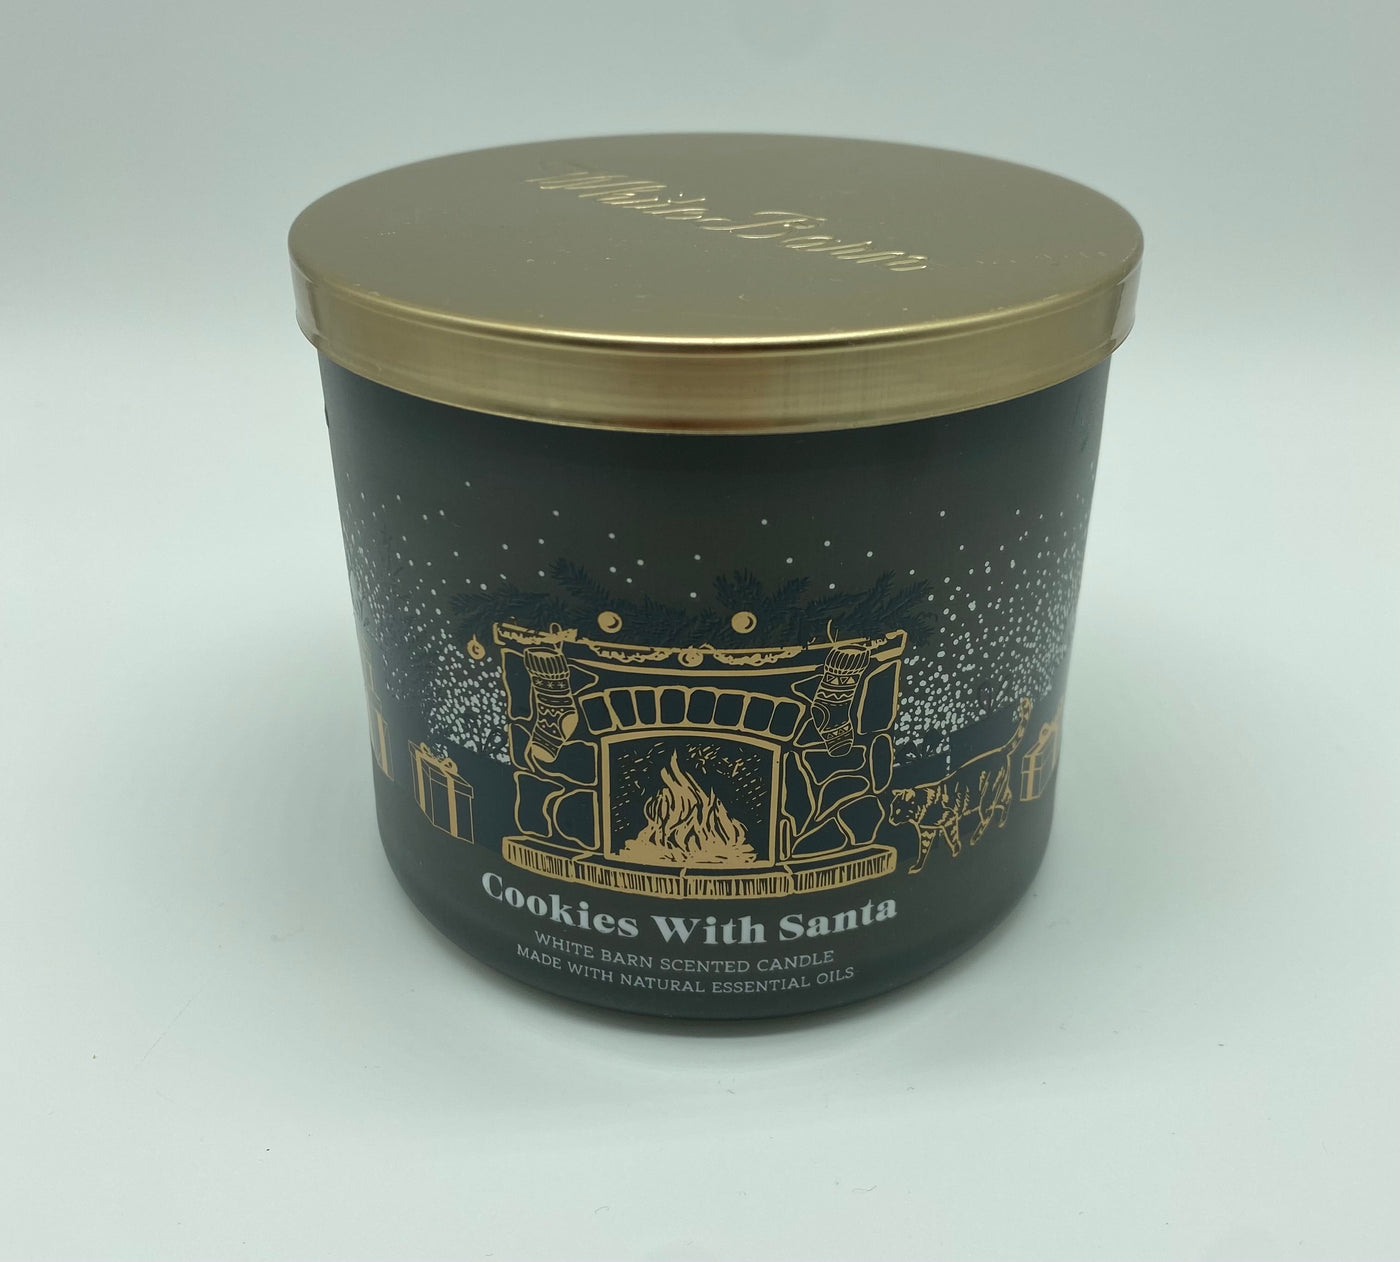 White Barn Bath and Body Works Cookie with Santa 3 Wick Scented Candle New w Lid